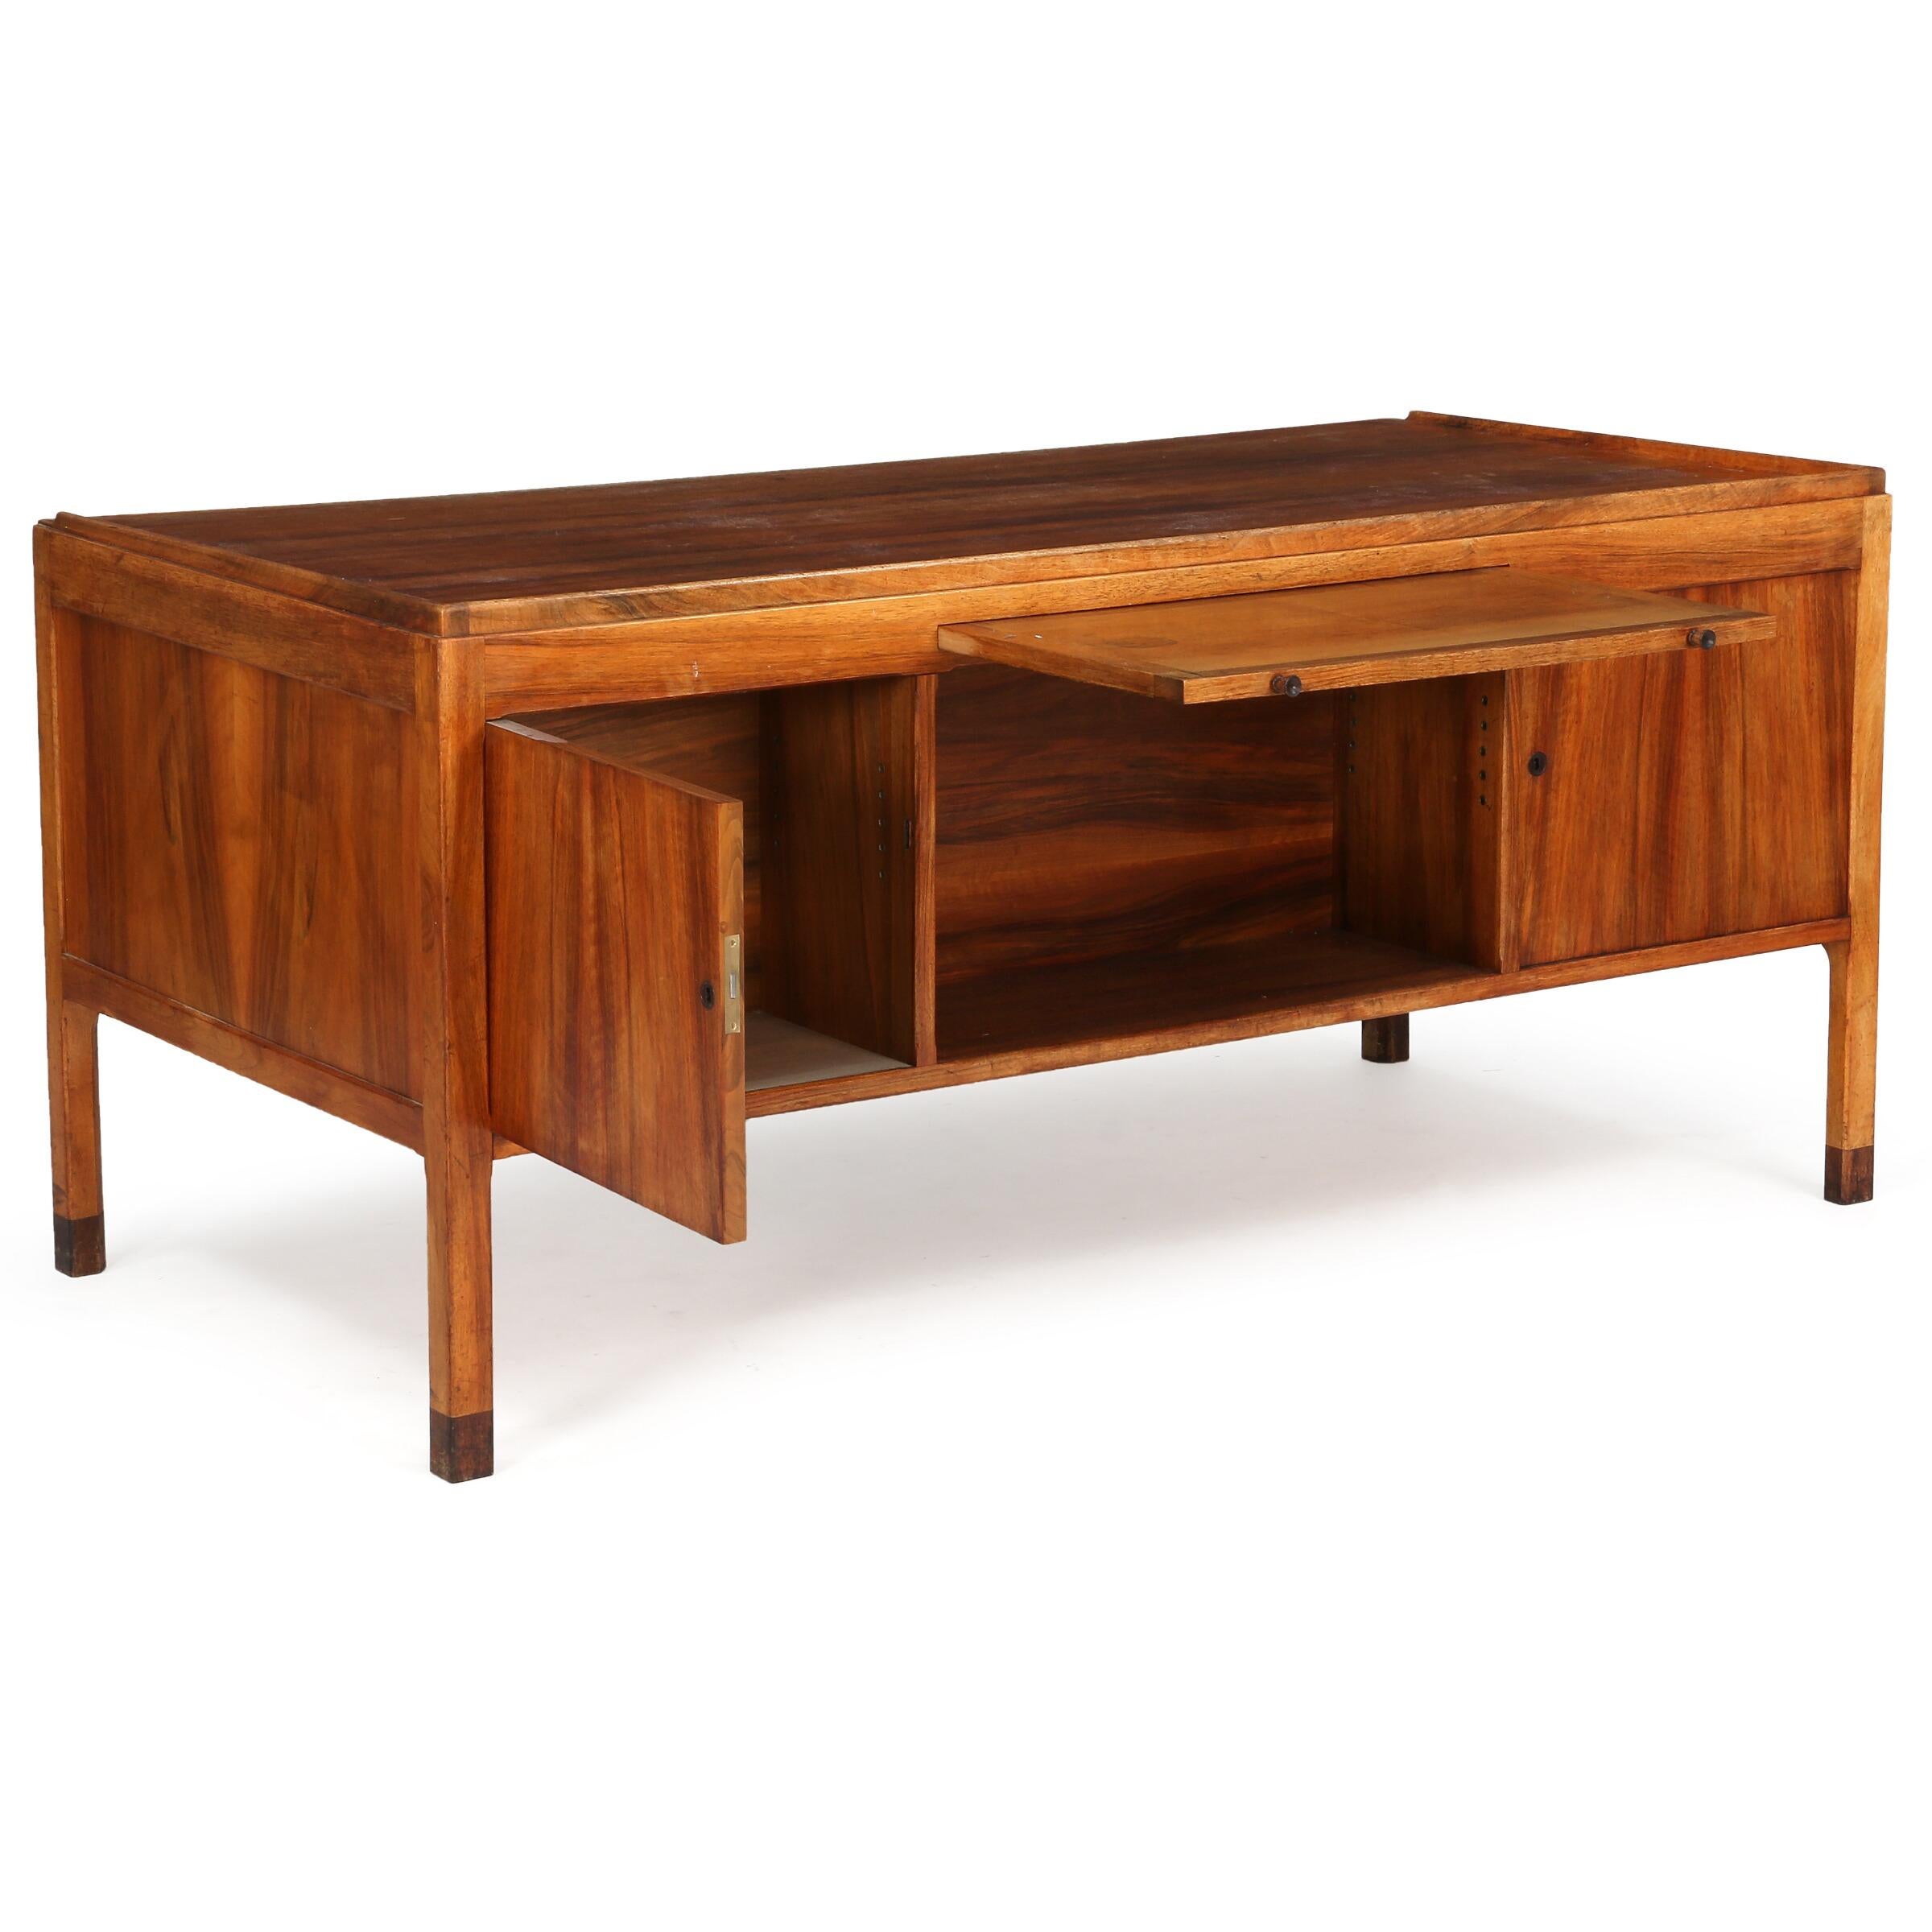 Scandinavian Modern Large Group incl. Walnut Desk and Sideboards Made by Ove Lander in 1947 For Sale